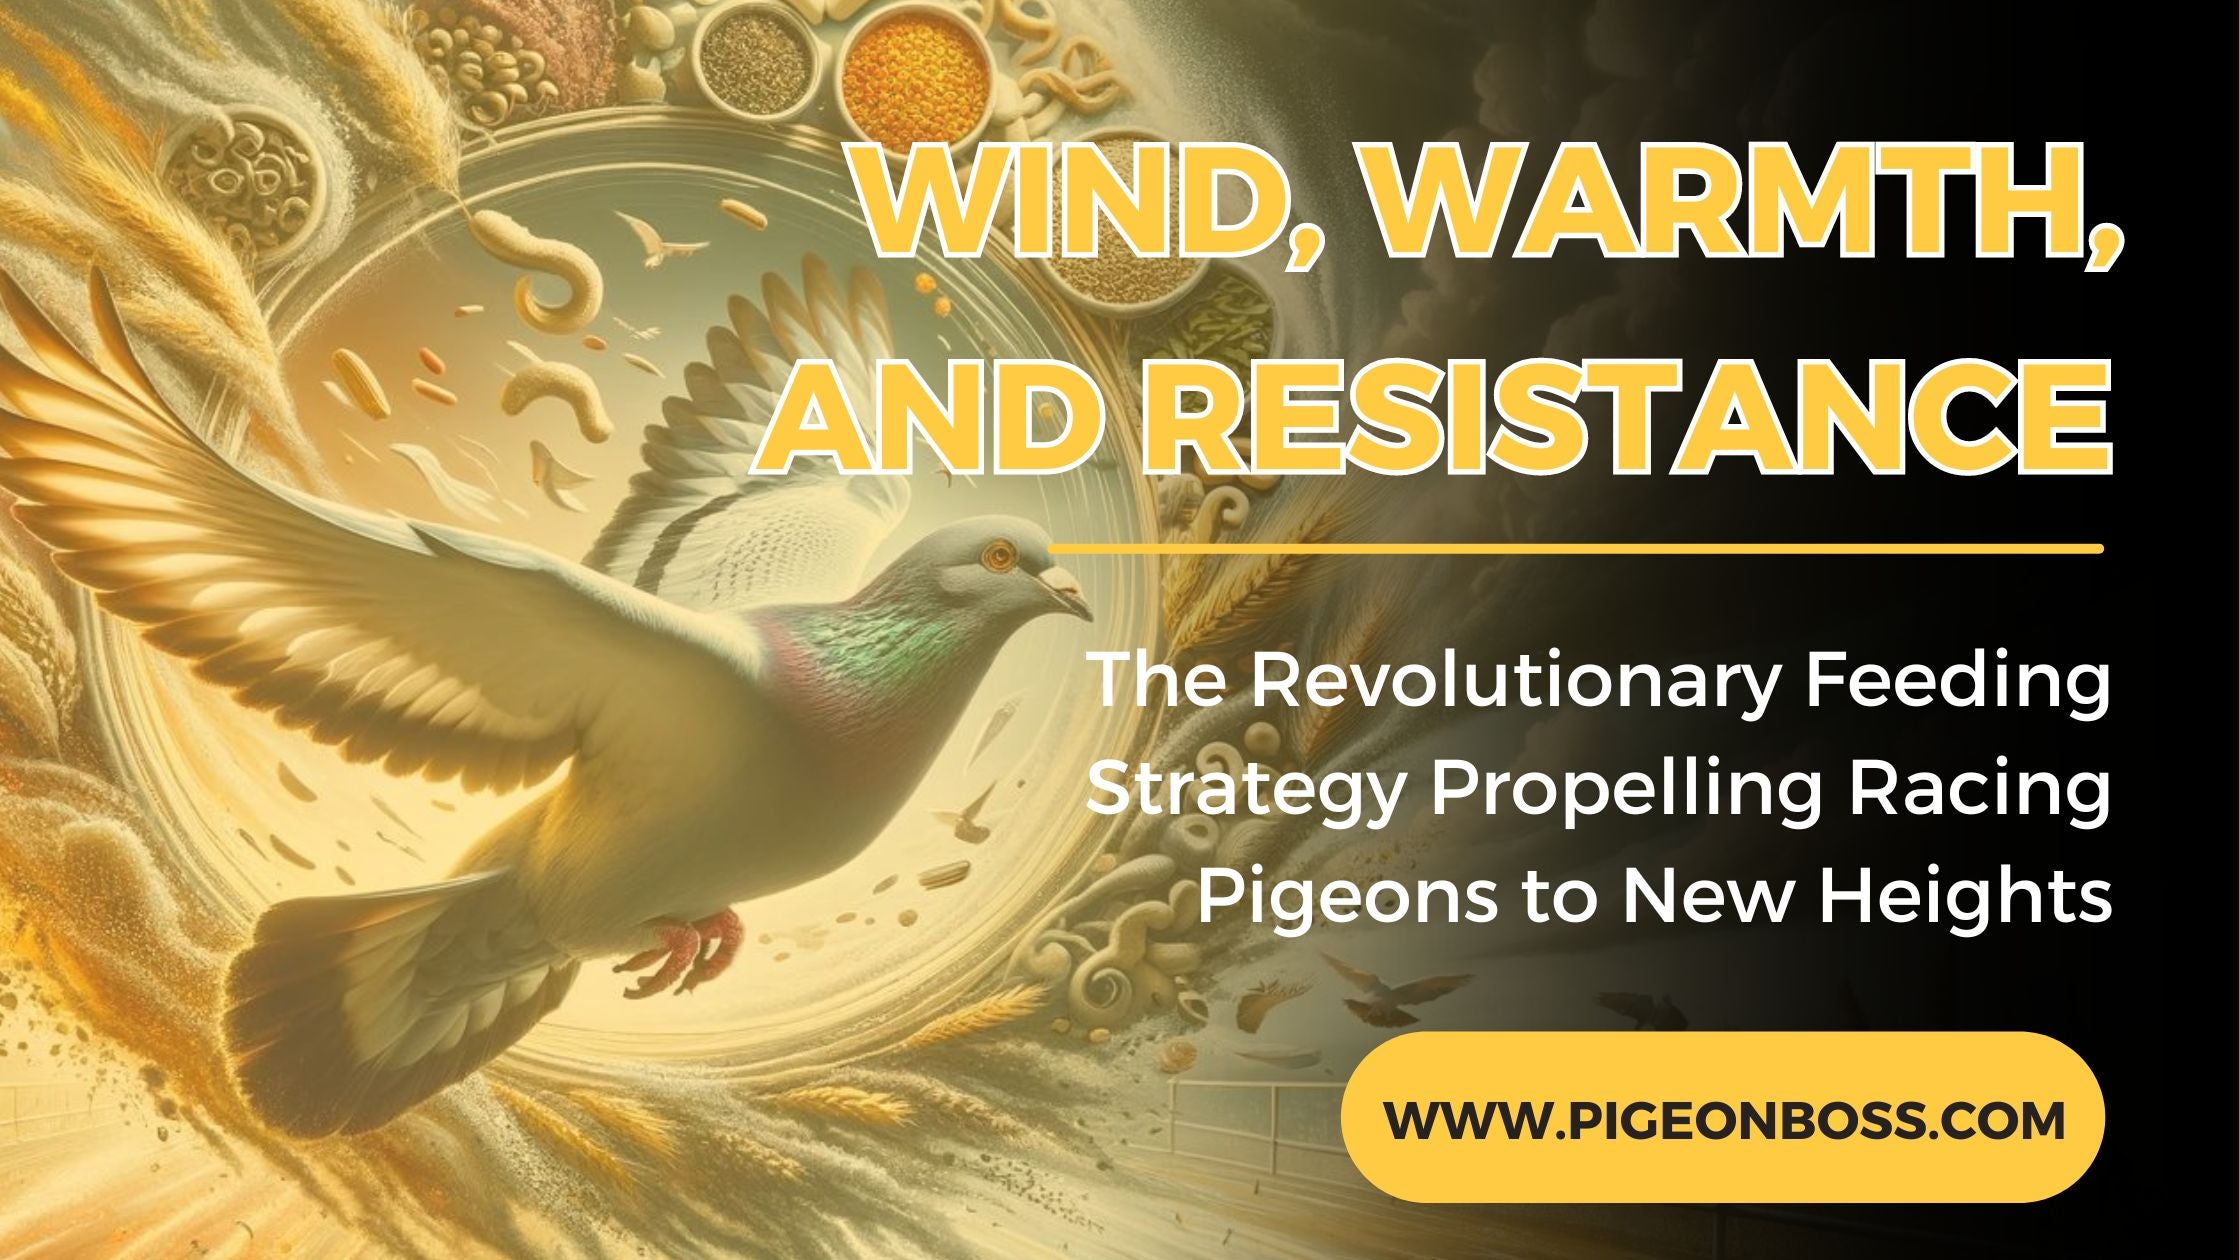 Wind, Warmth, and Resistance: The Revolutionary Feeding Strategy Propelling Racing Pigeons to New Heights